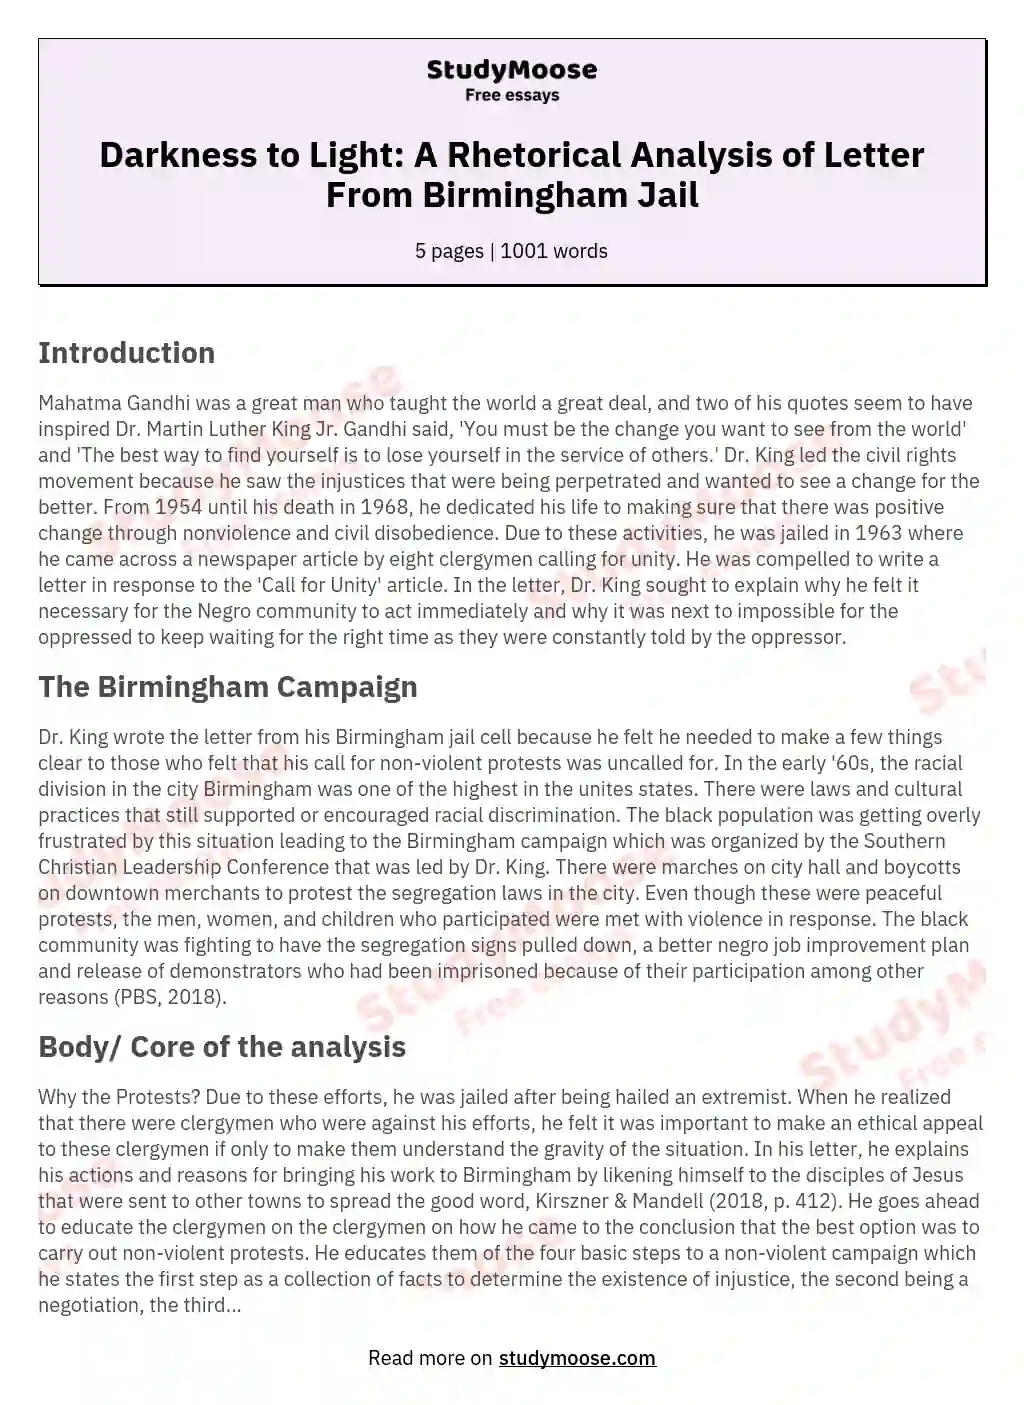 darkness-to-light-a-rhetorical-analysis-of-letter-from-birmingham-jail-free-essay-example